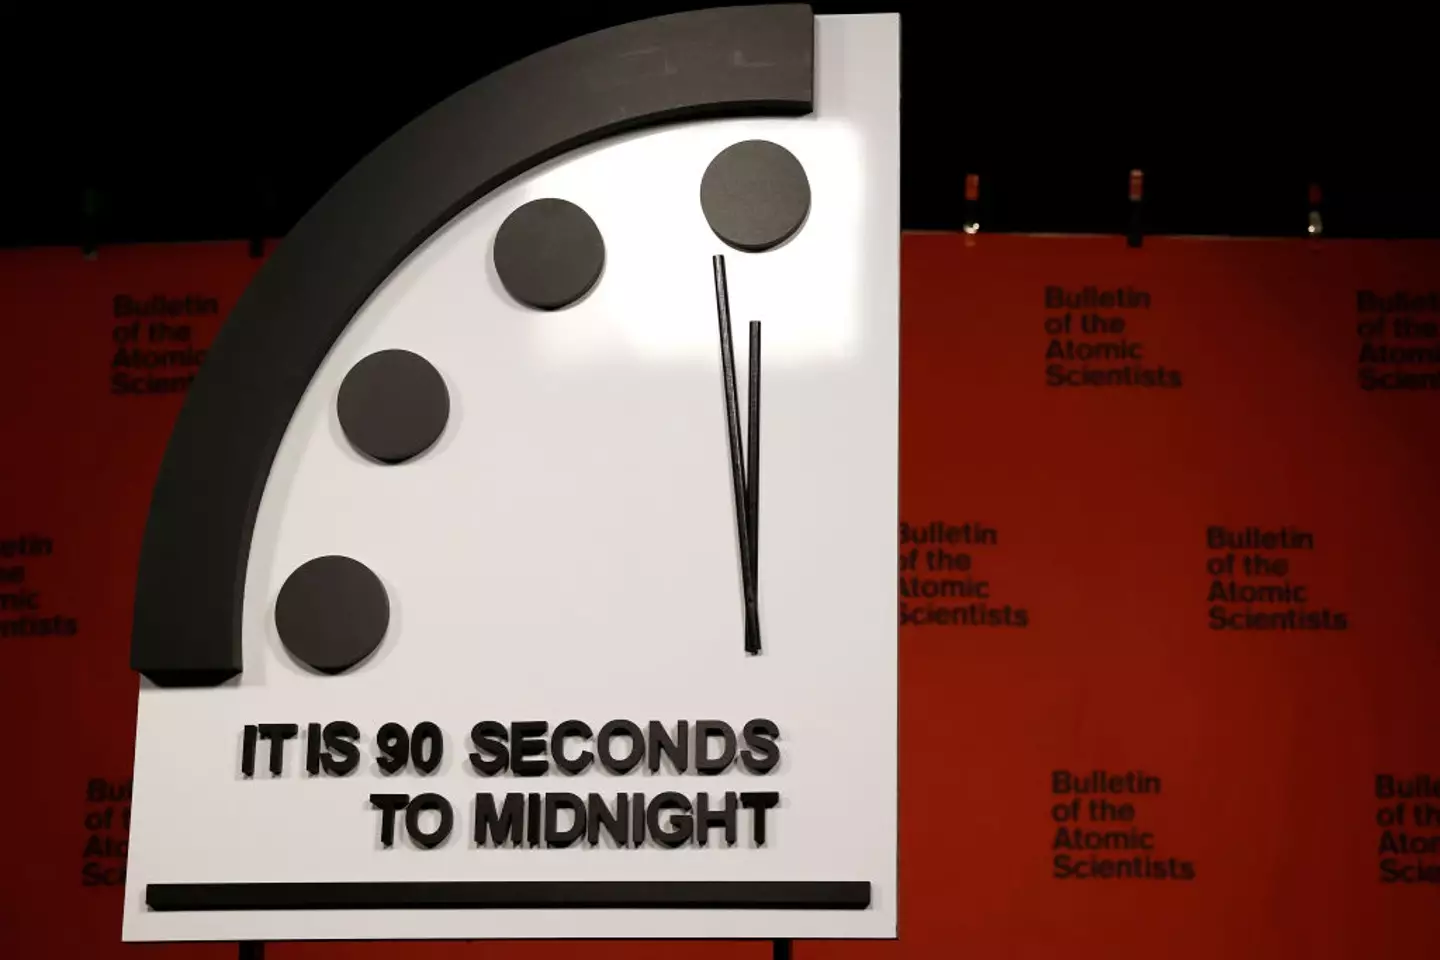 The Bulletin of the Atomic Scientists has shared an announcement on the Doomsday Clock countdown.